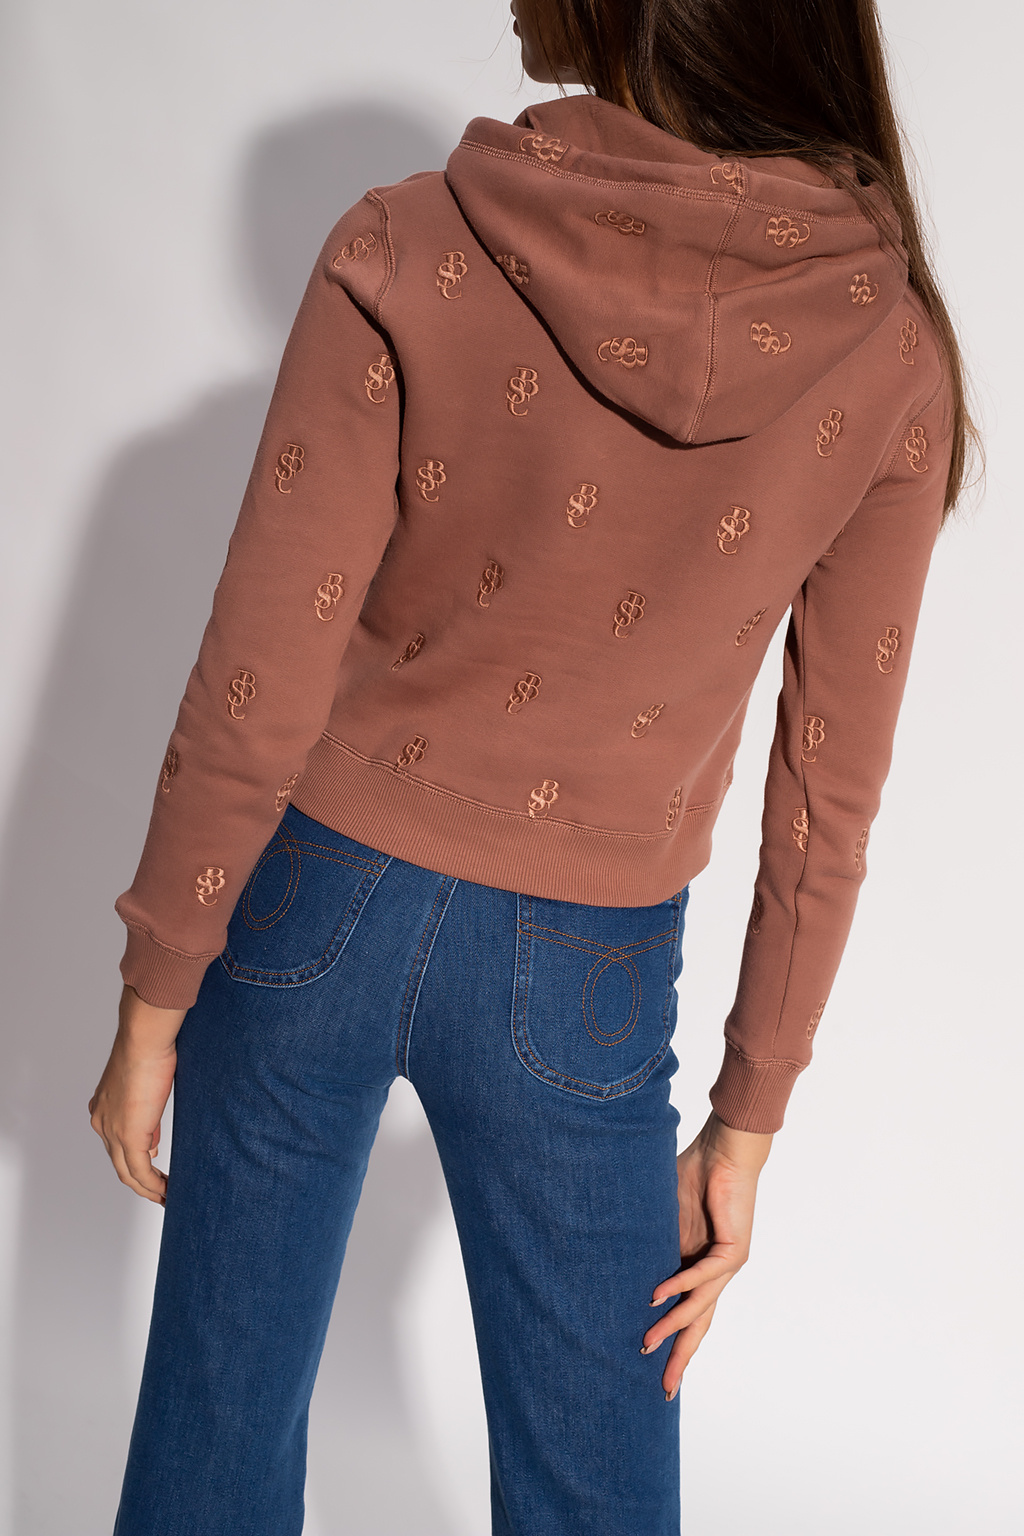 See By Chloé Logo-embroidered hoodie